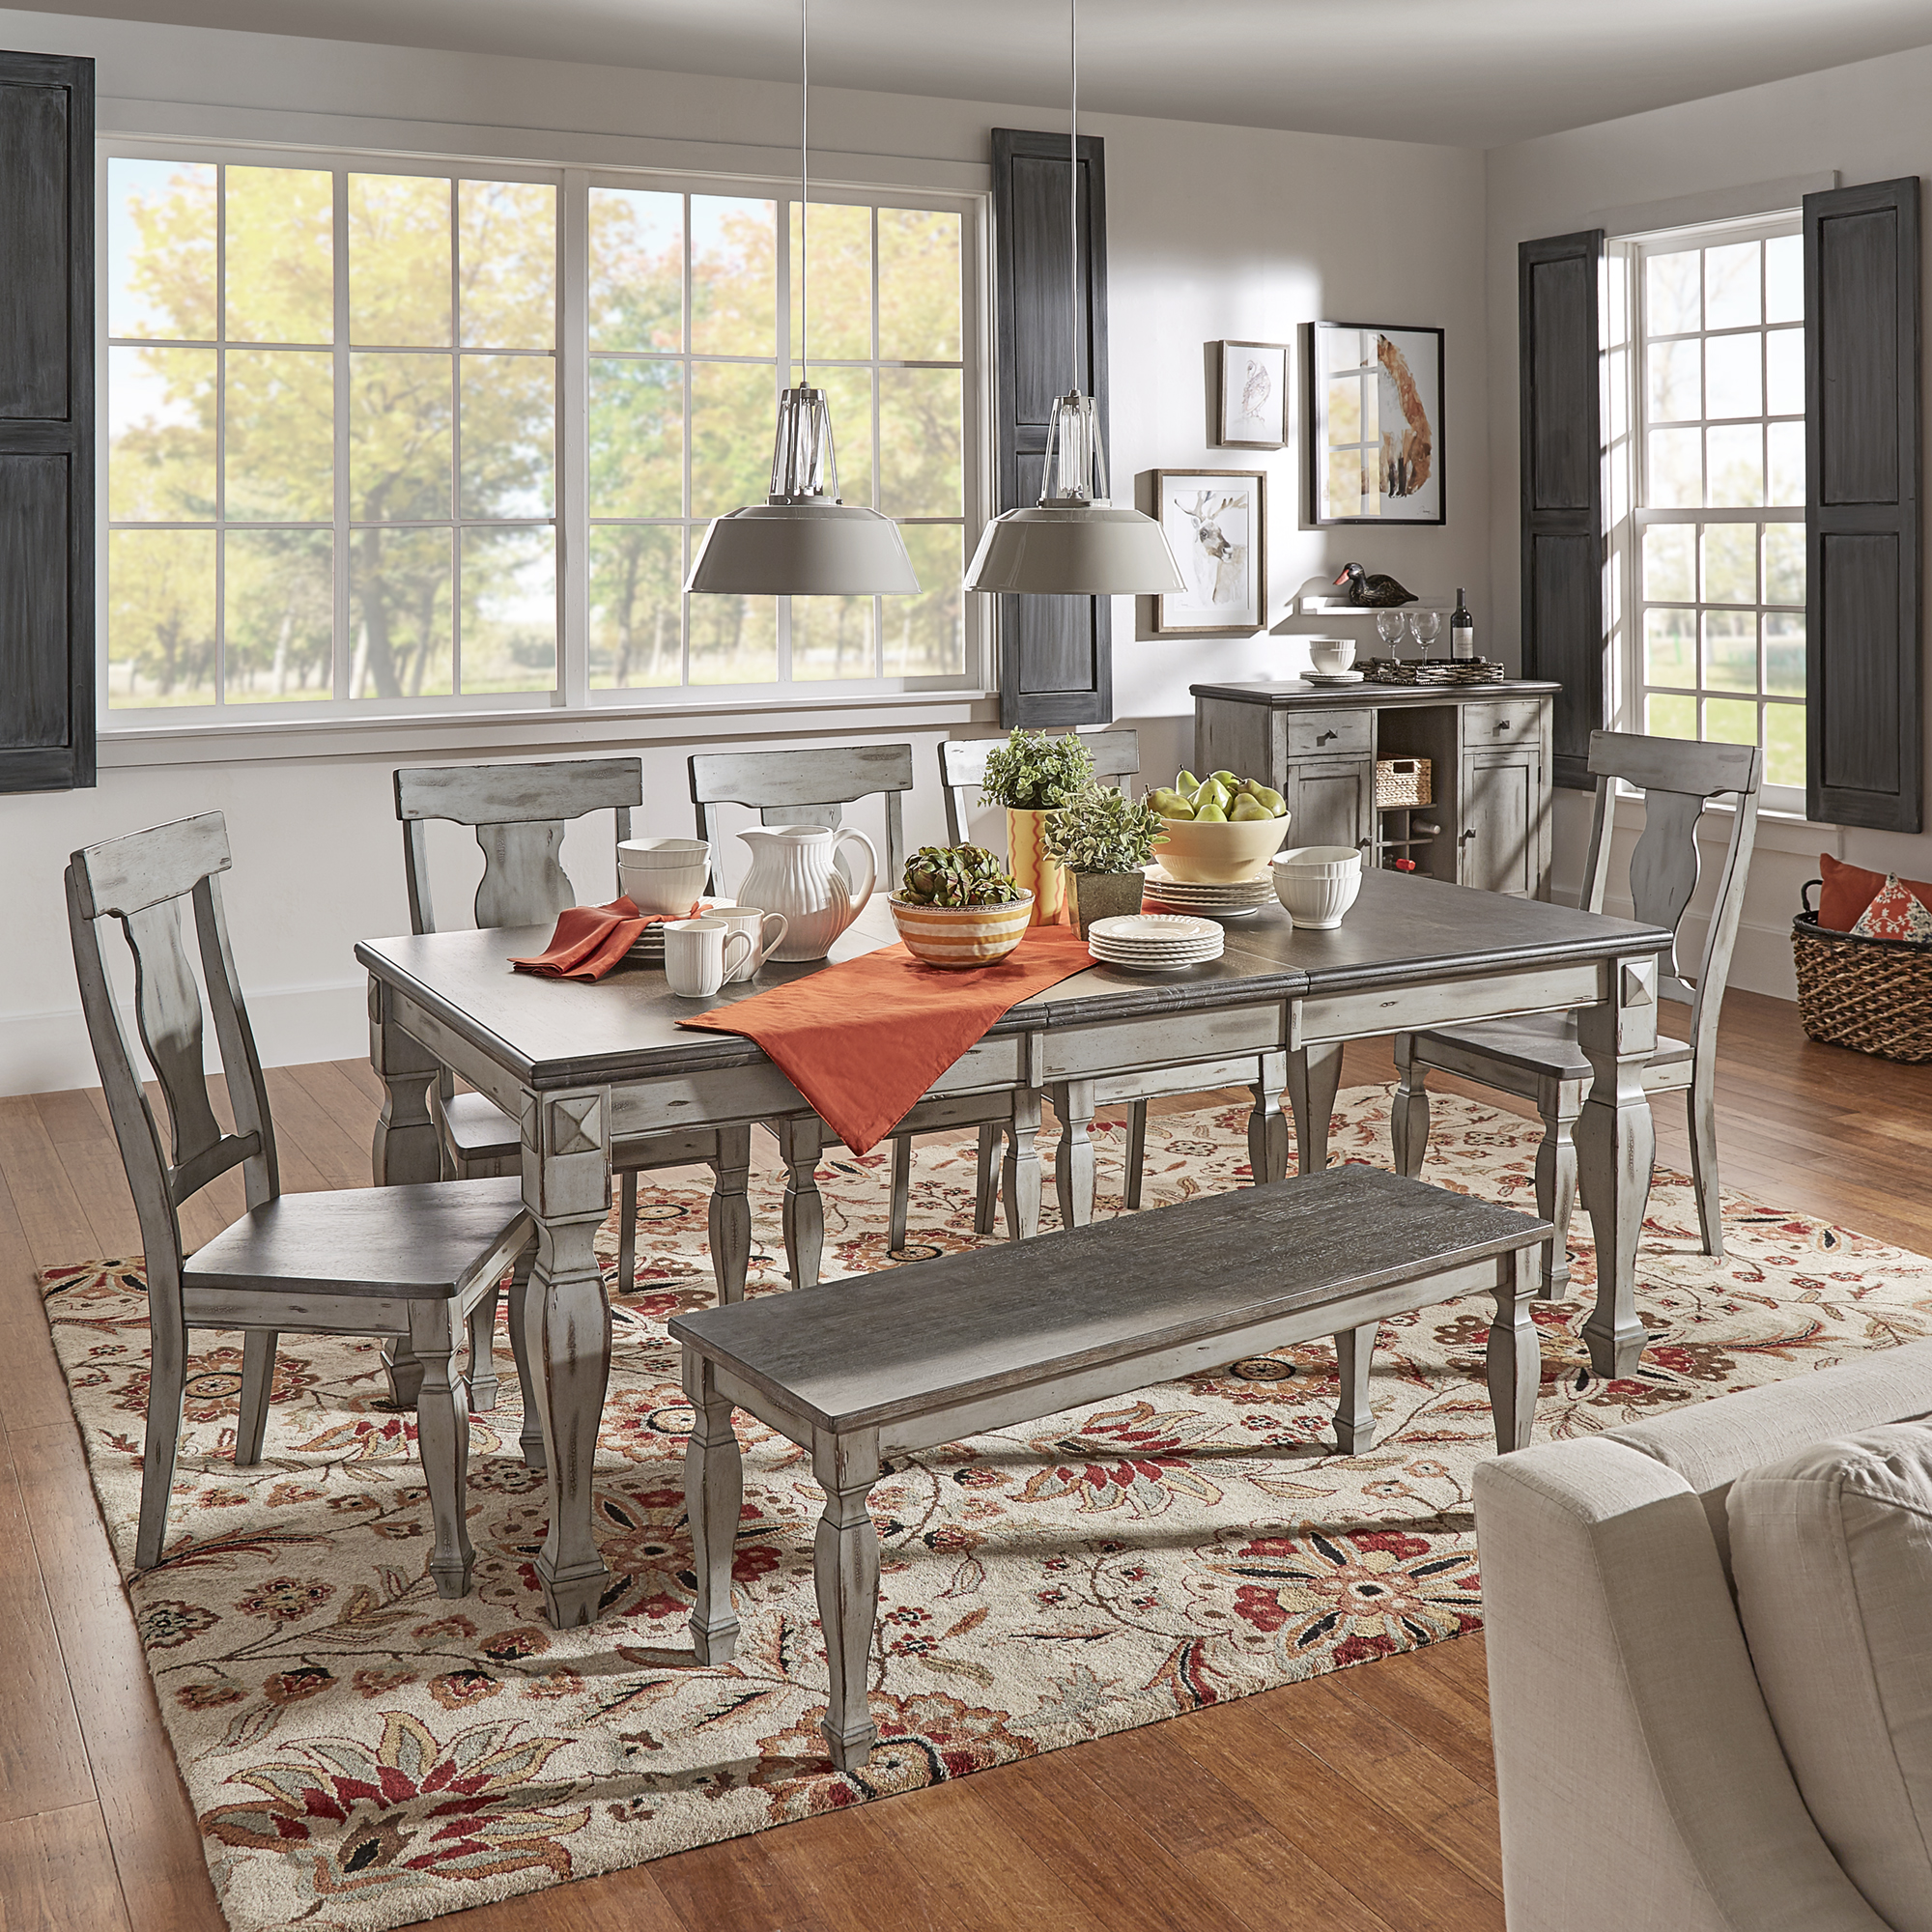 This image shows the iNSPIRE Q Grey Two-Tone Antique Finish Wood Dining Set with 5 chairs, 1 bench, and 1 dining table. The dining table is decorated with white, yellow, green, and orange accessories. The white and orange accessories complement the red and white rug on the hardwood floors.